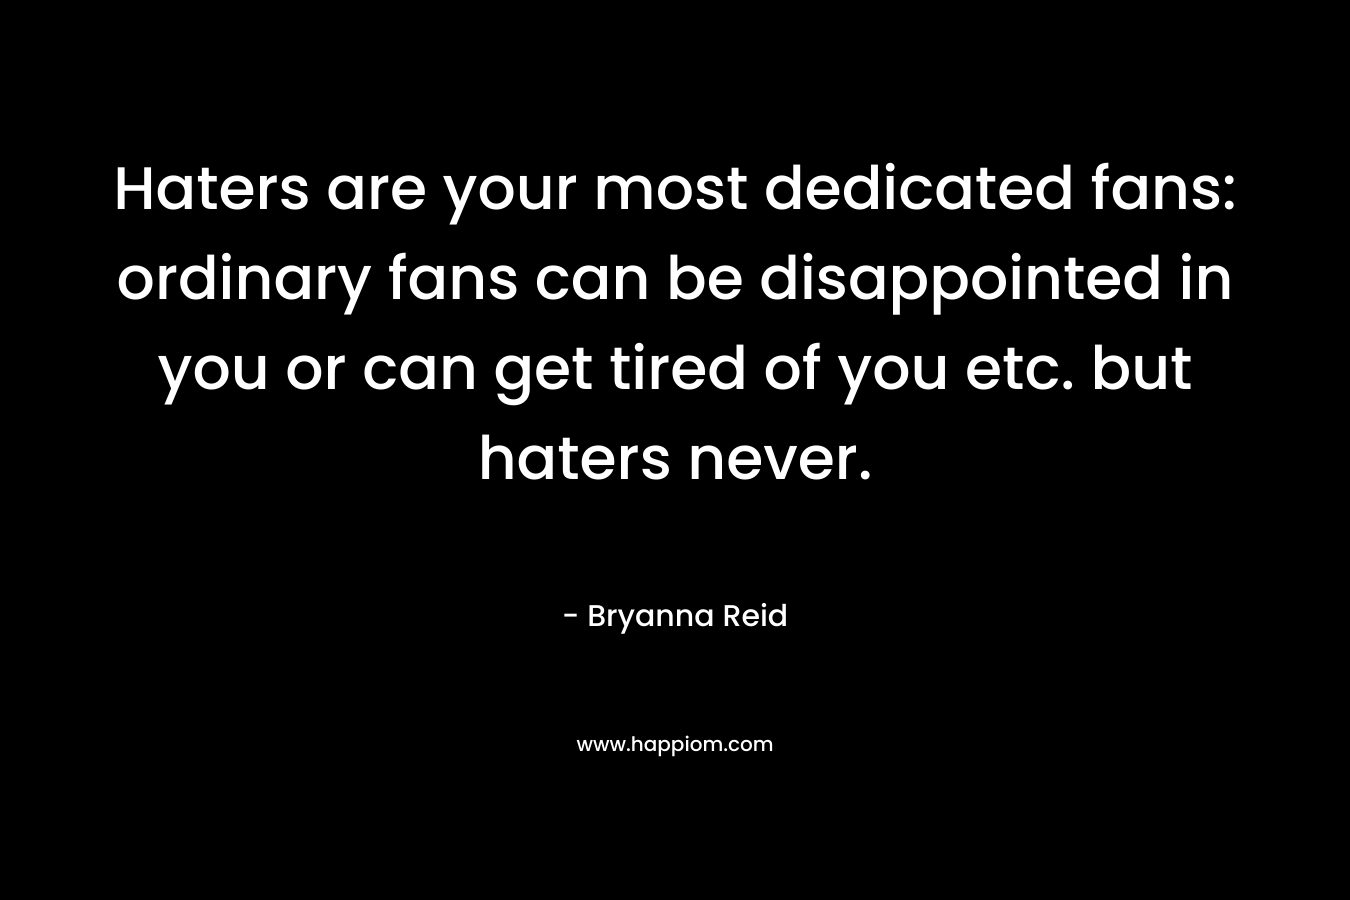 Haters are your most dedicated fans: ordinary fans can be disappointed in you or can get tired of you etc. but haters never.